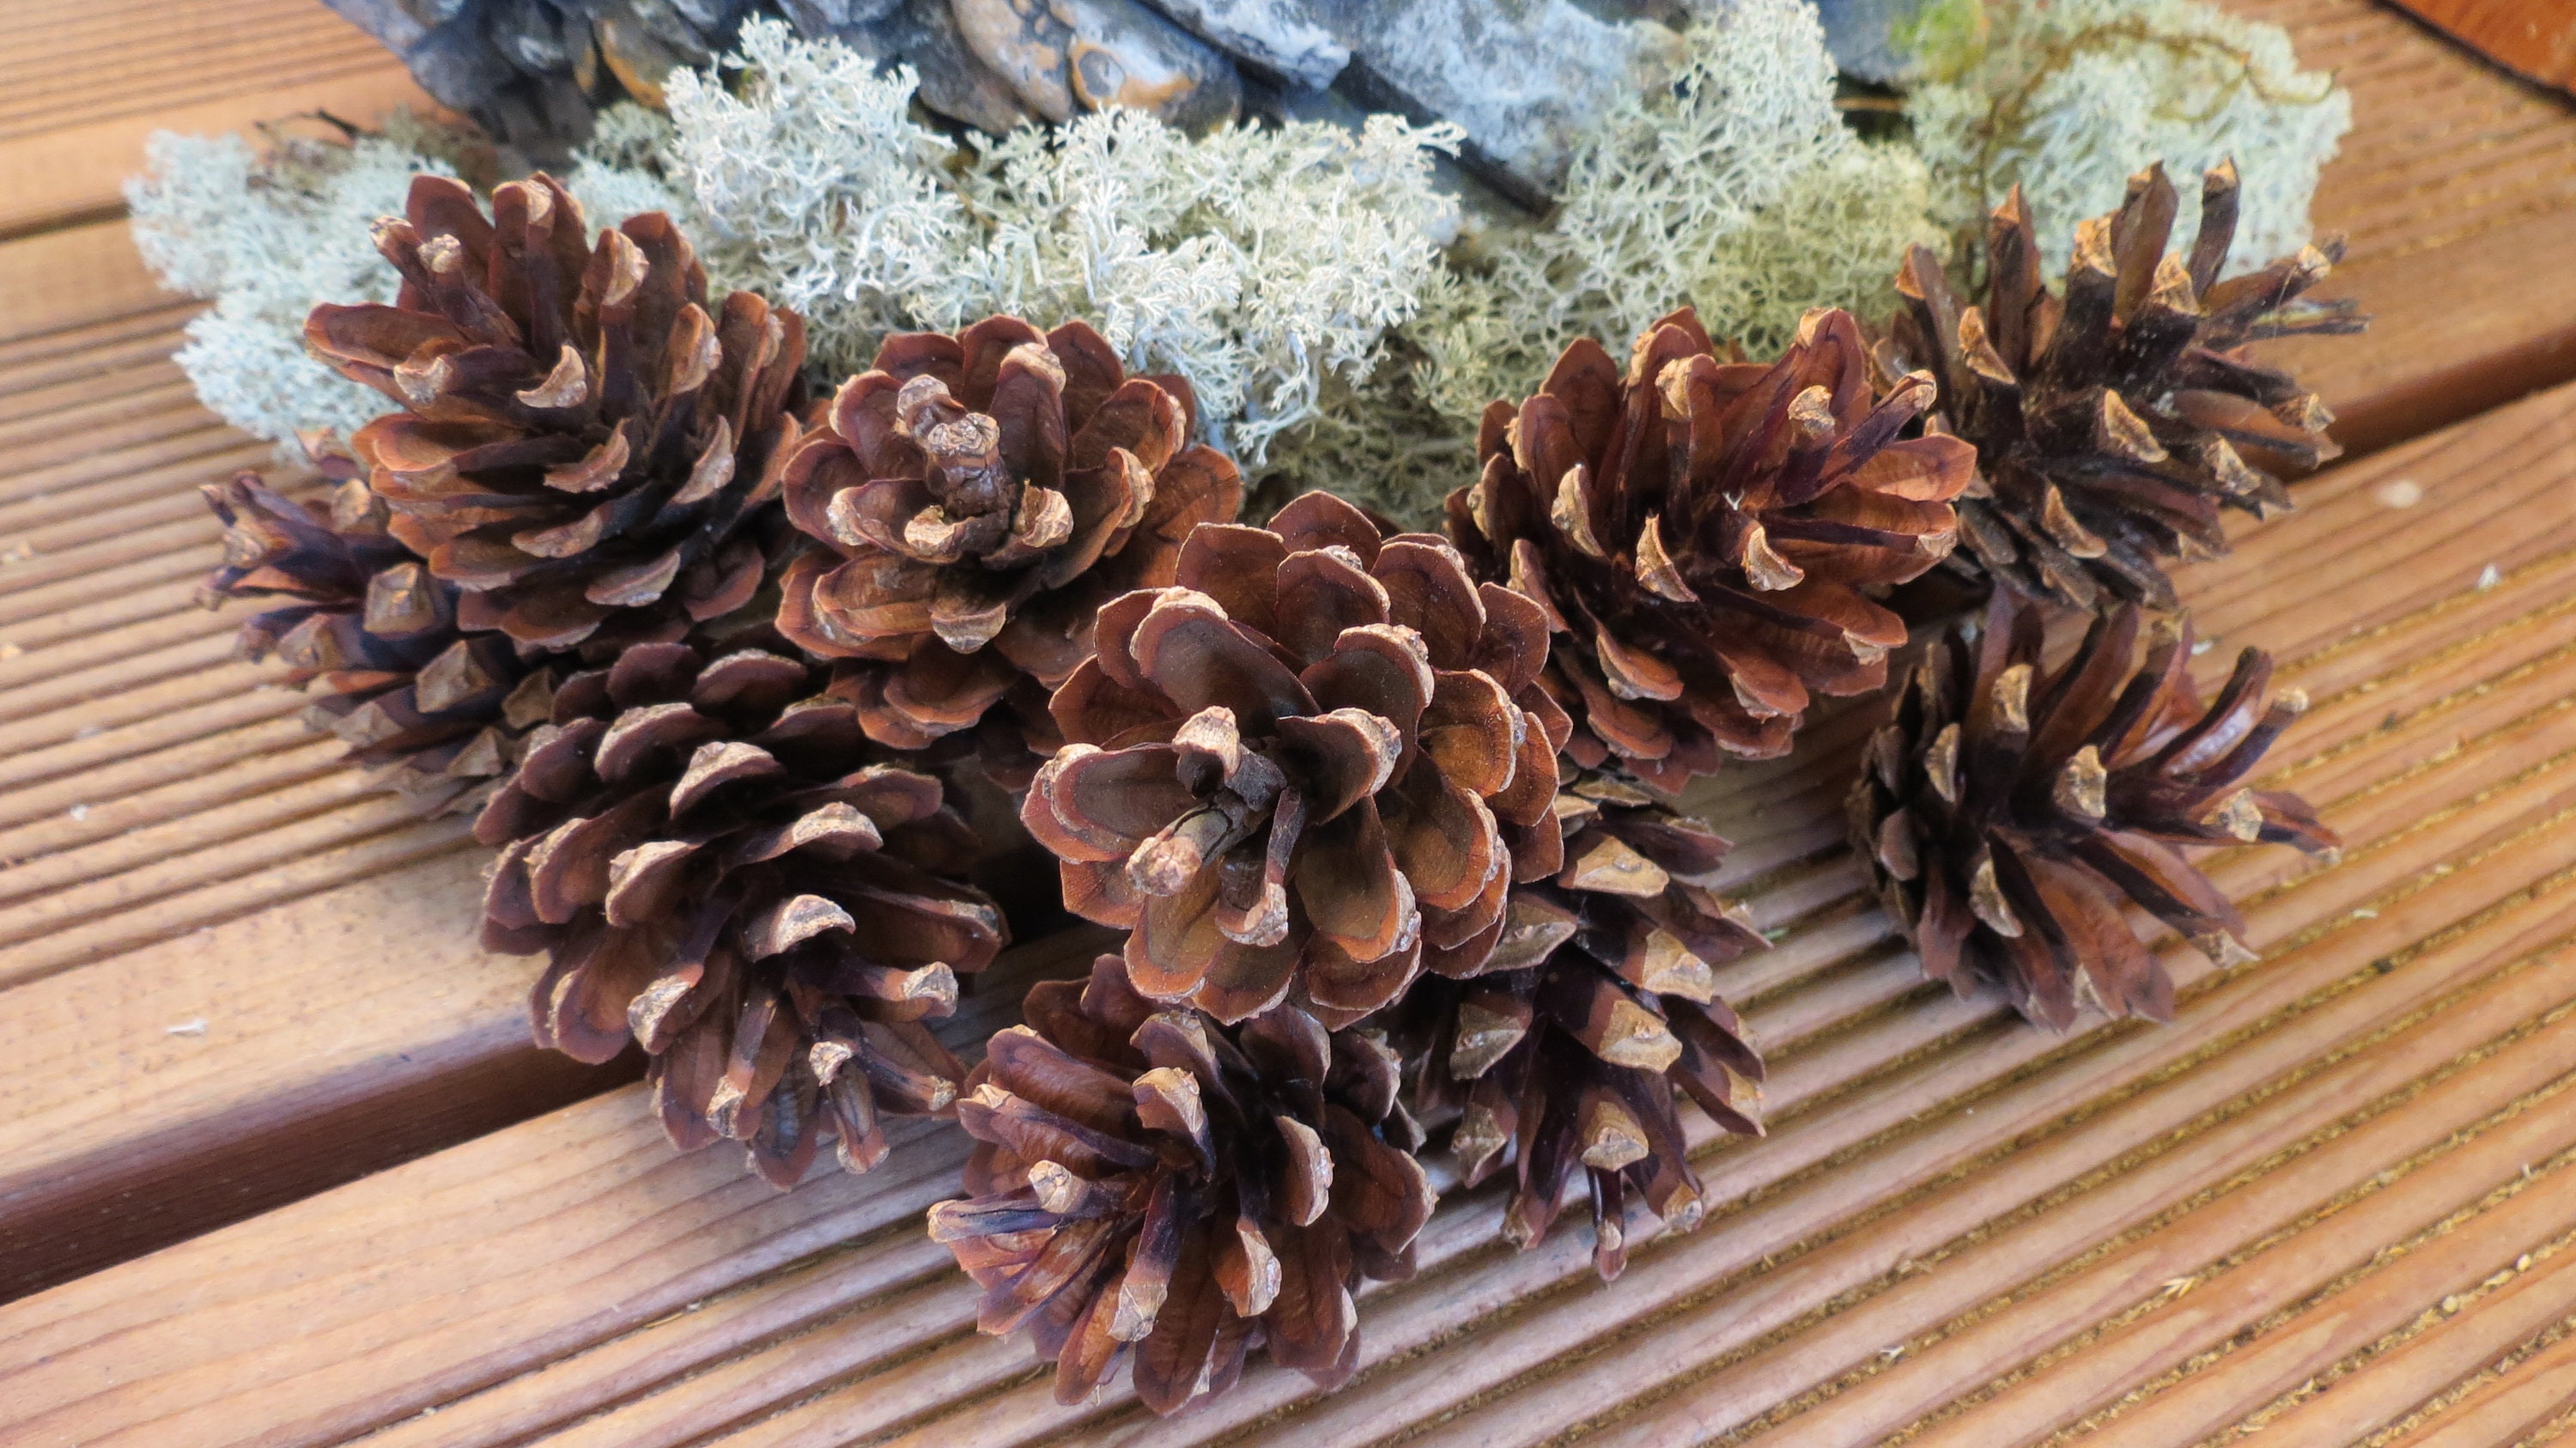 50 Natural pine cones - small/med/large assortment for crafts, decorations